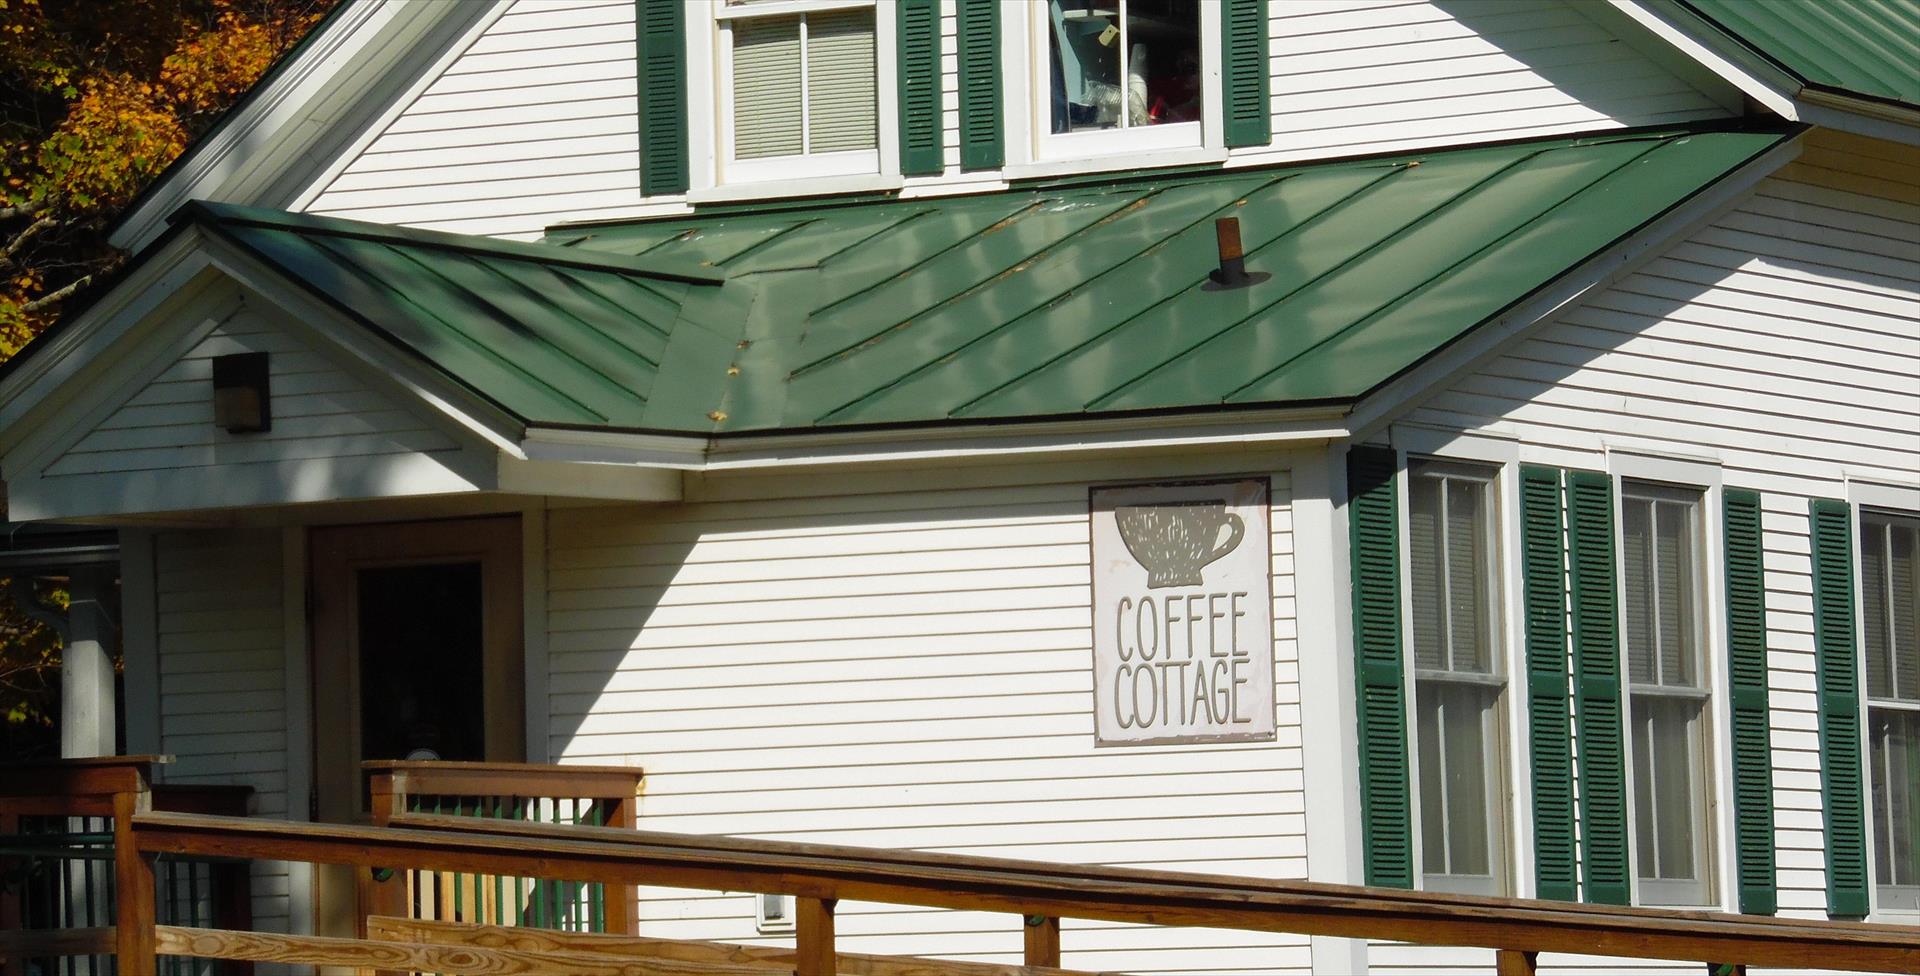 Stop by The Coffee Cottage!